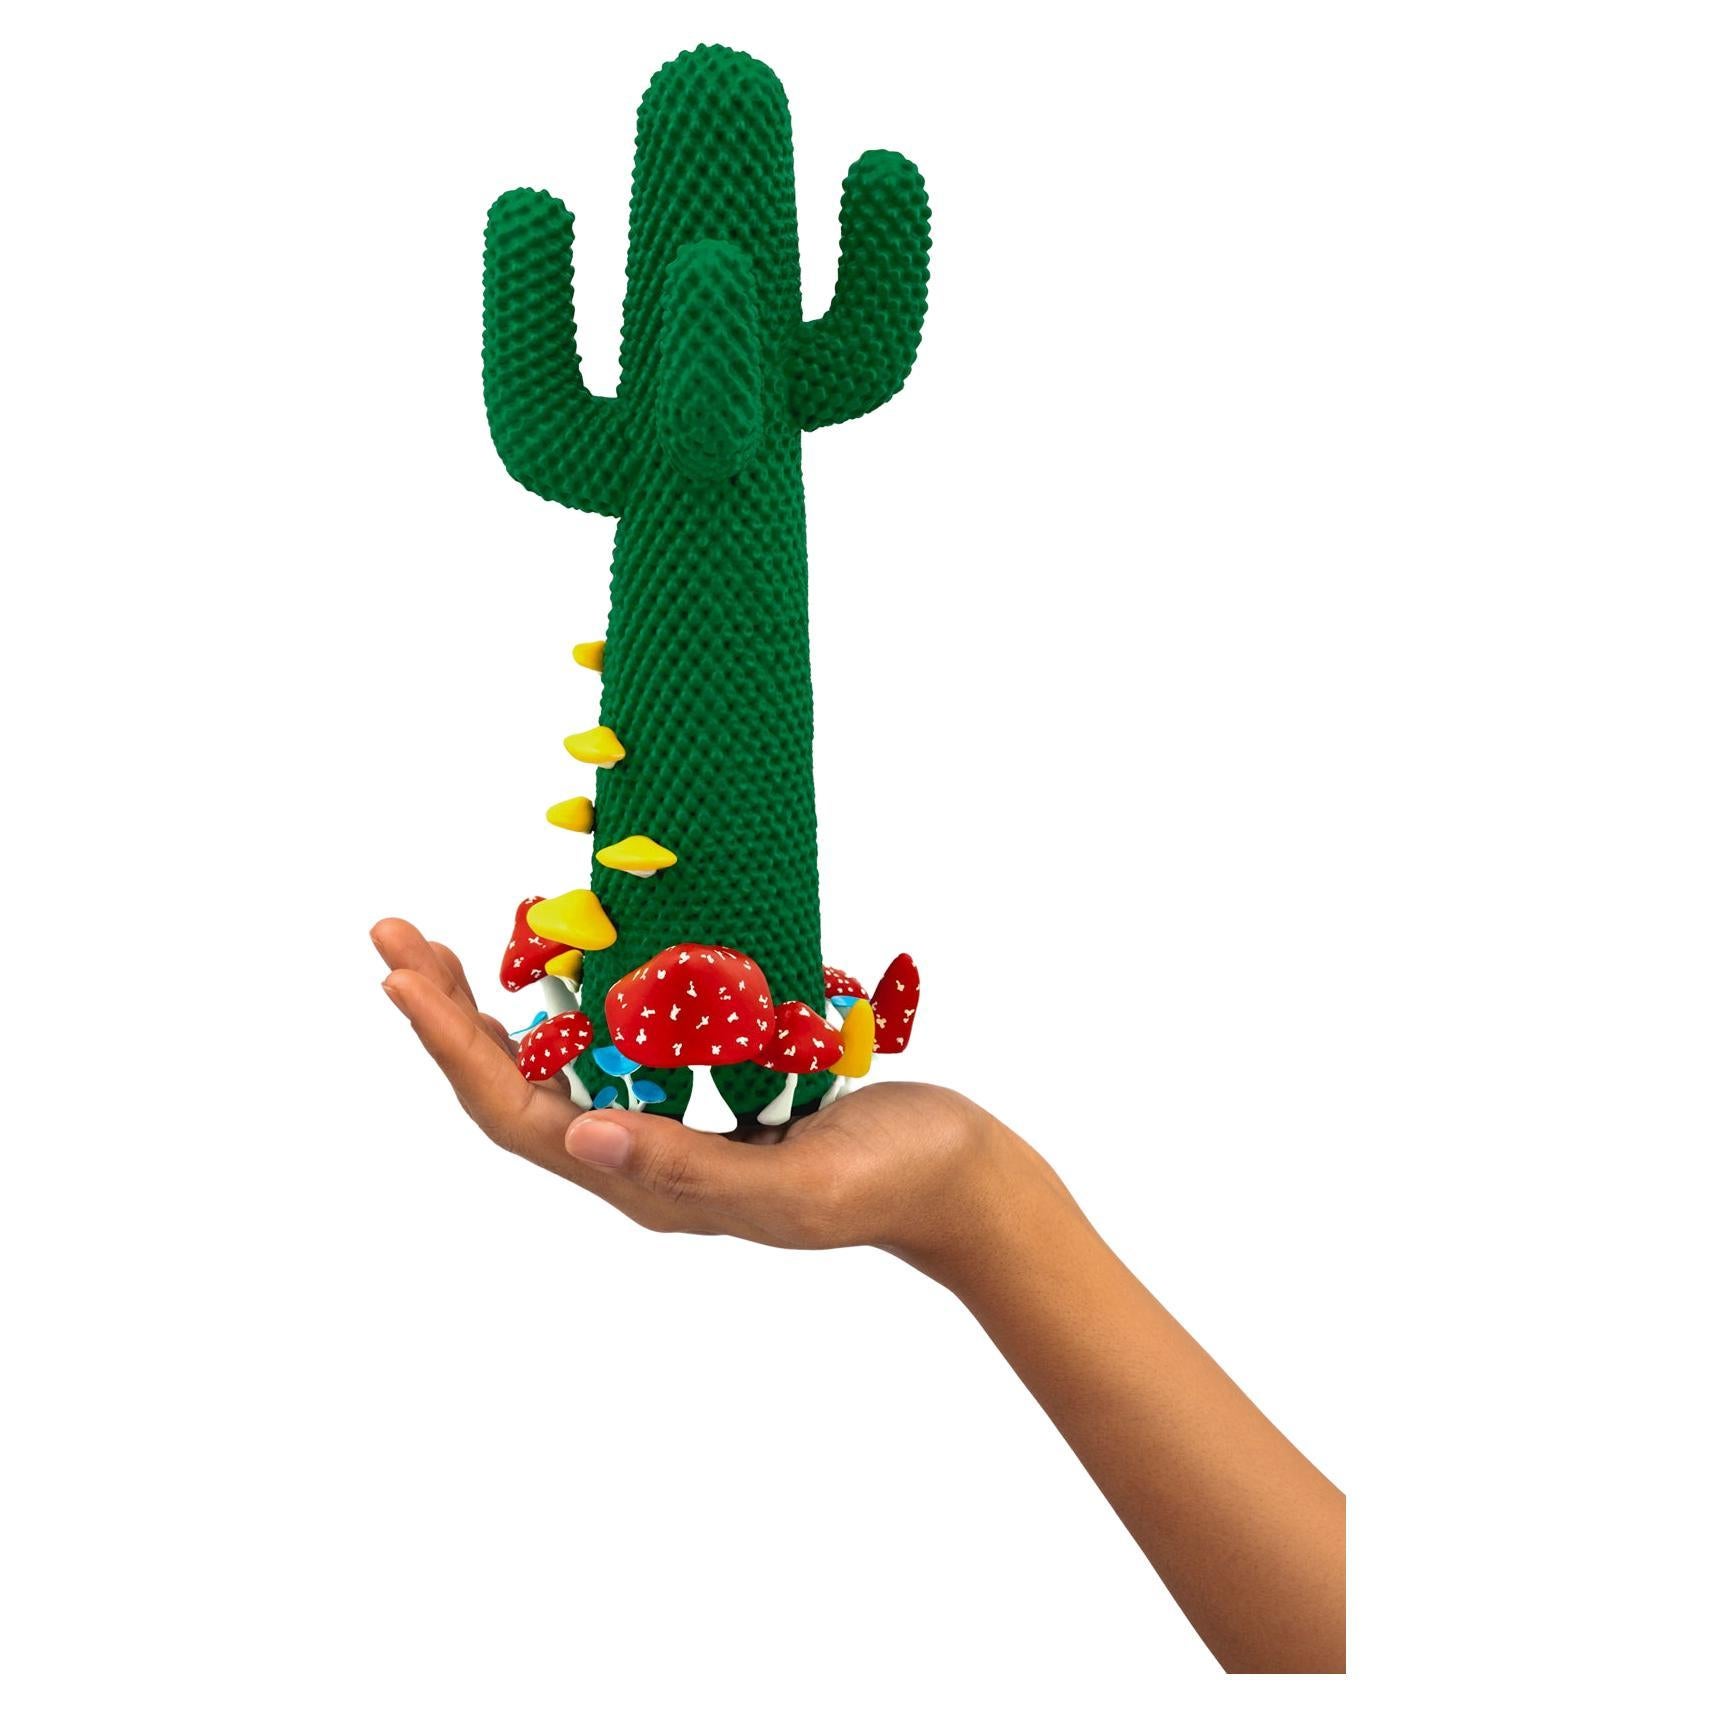 LIMITED EDITION #83/99

Gufram presents the miniaturised version of the Shroom CACTUS® created in collaboration with A$AP Rocky and the artist’s new design studio HOMMEMADE Exactly as the real-size Shroom CACTUS®, the new Guframini piece features